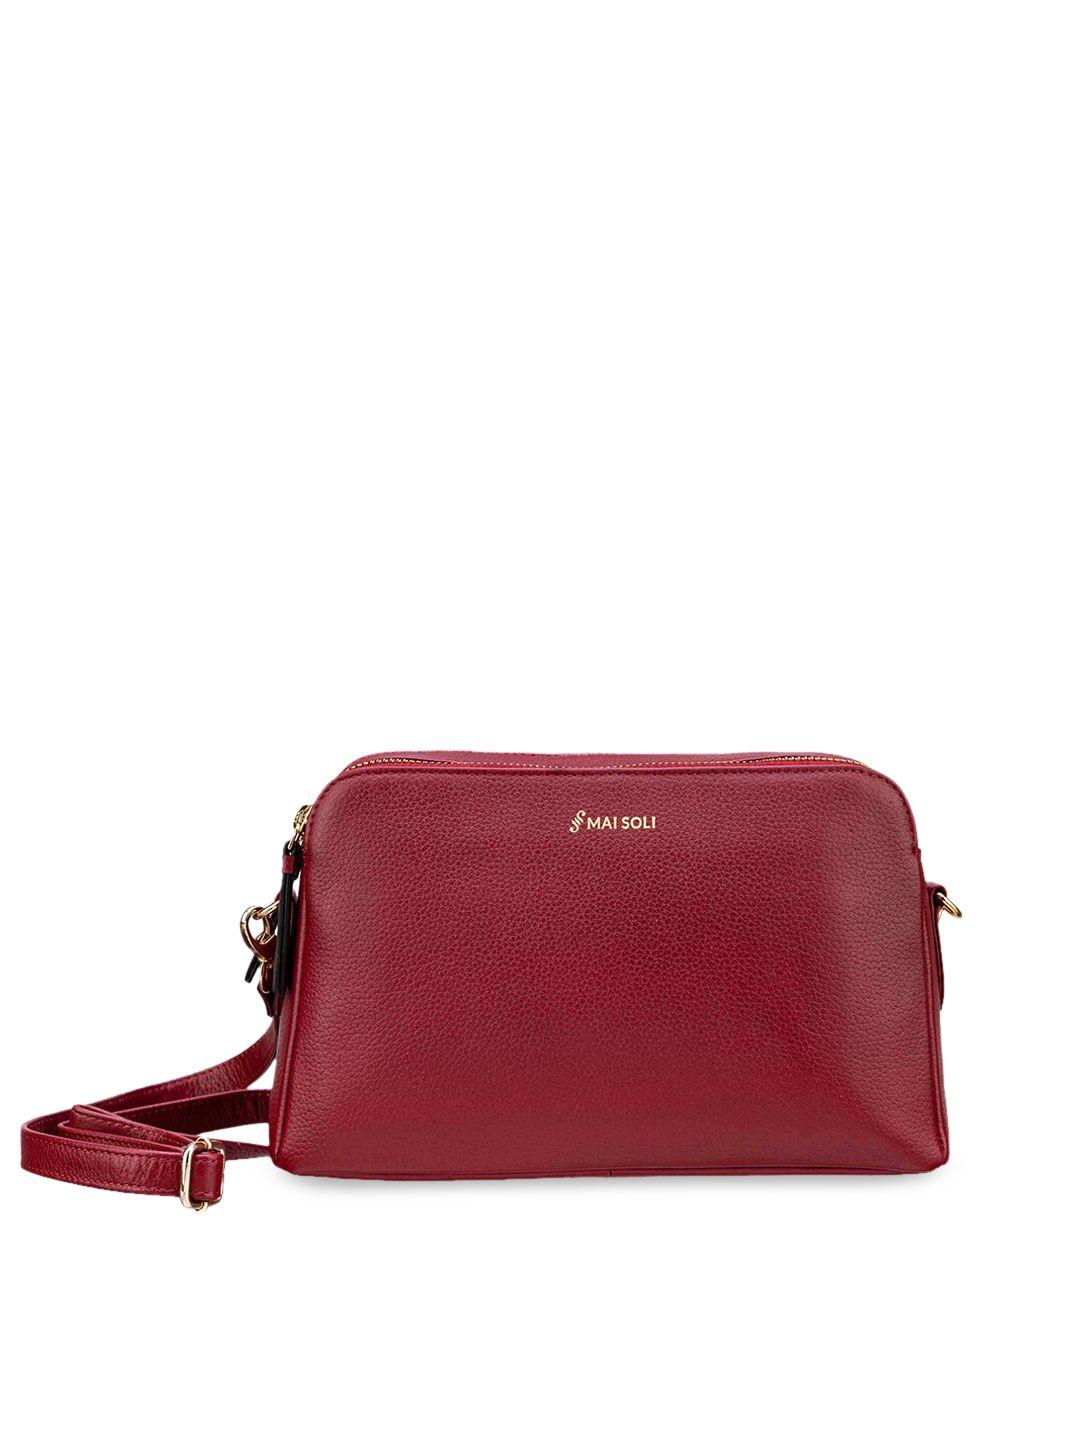 mai soli women red solid leather sling bag